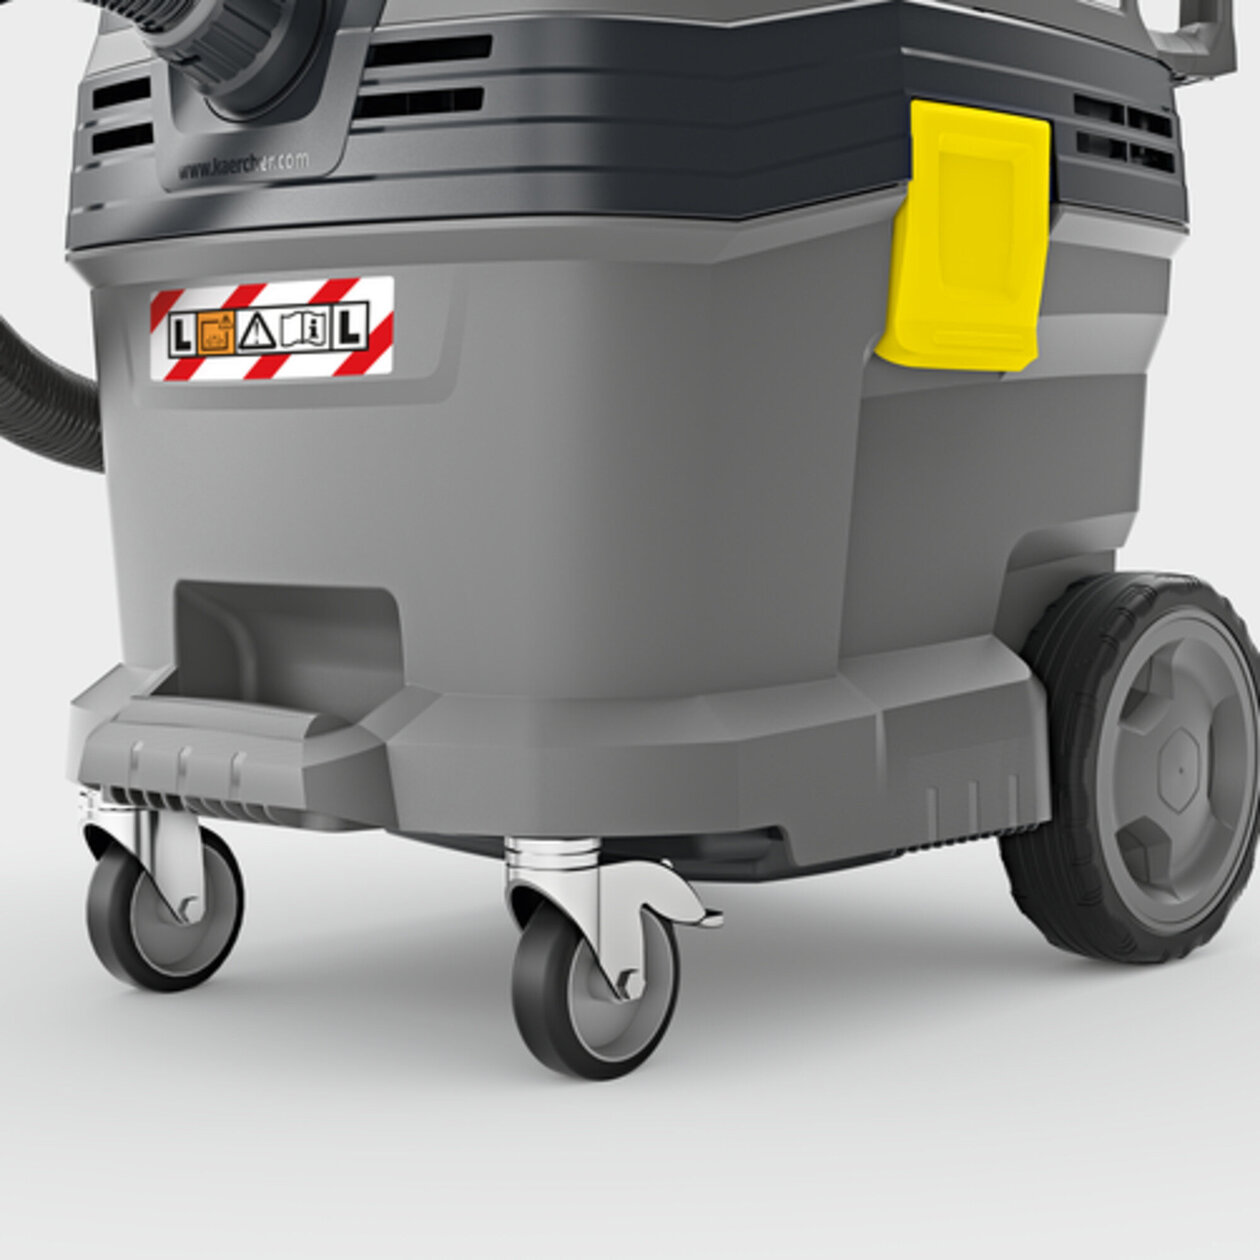 Wet and dry vacuum cleaner NT 30/1 Tact L CUL: Rugged container with bumpers and metal castors.